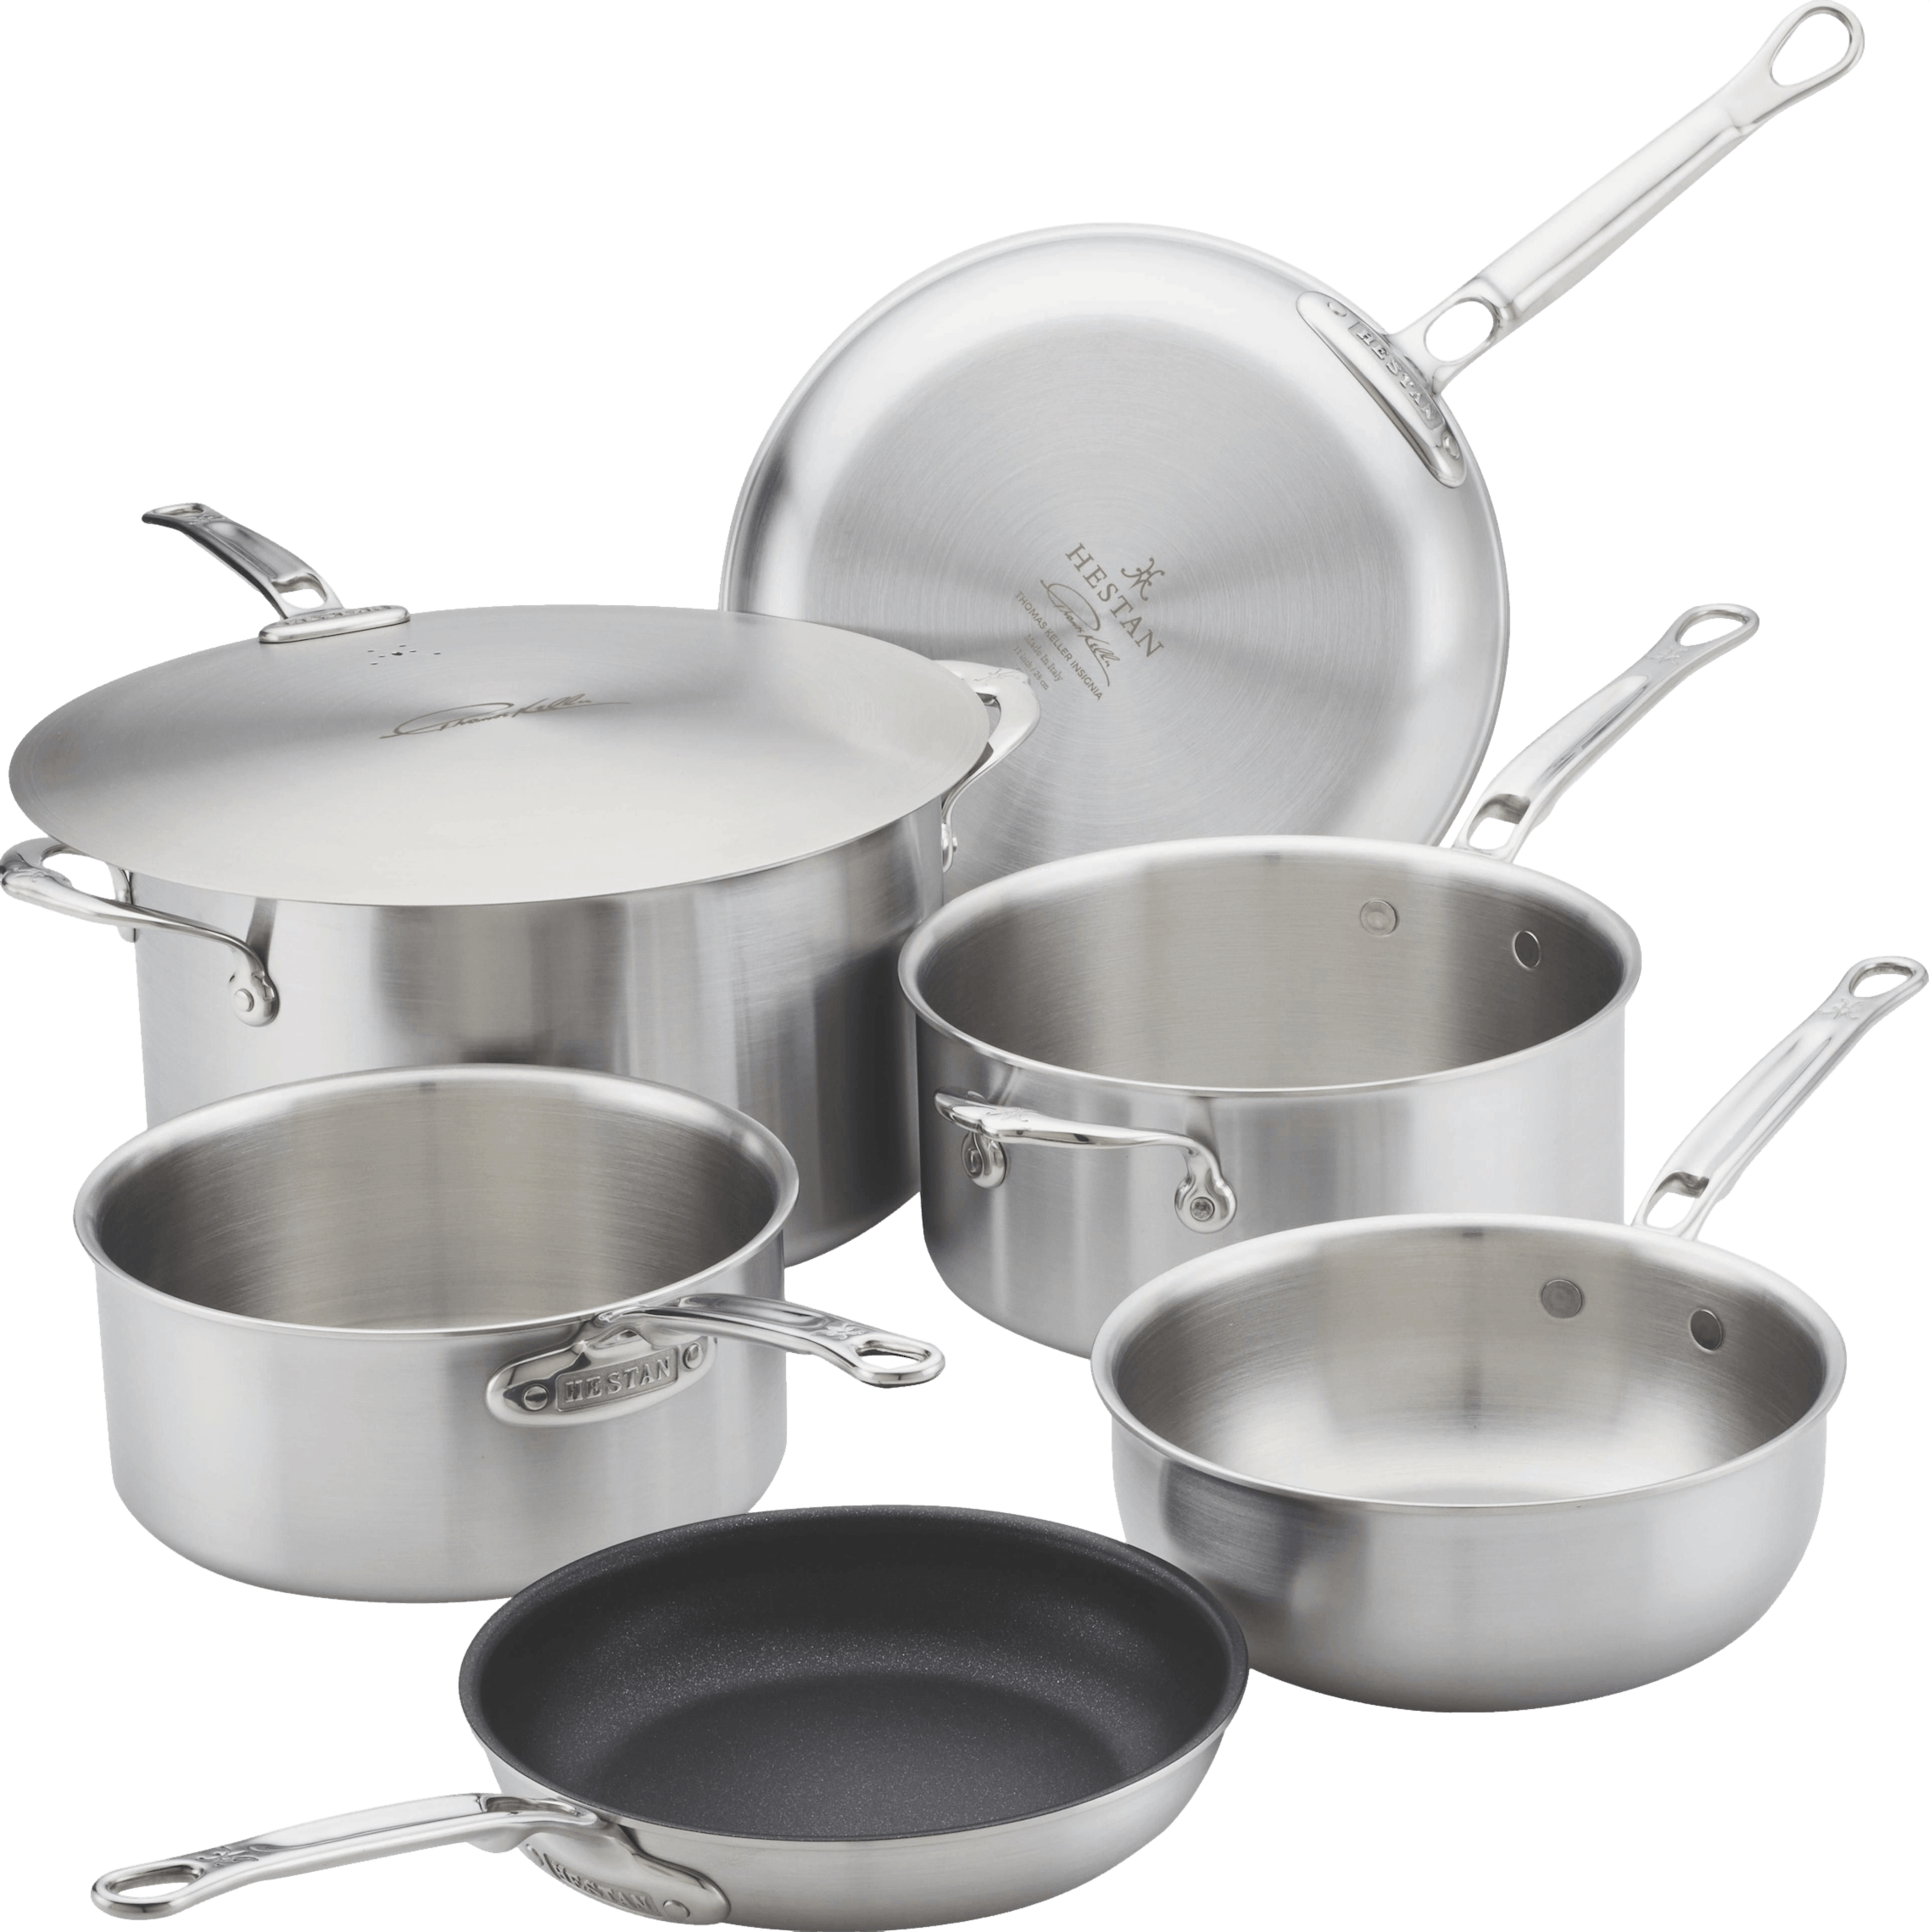 Hestan Cookware Review: Better than All-Clad?